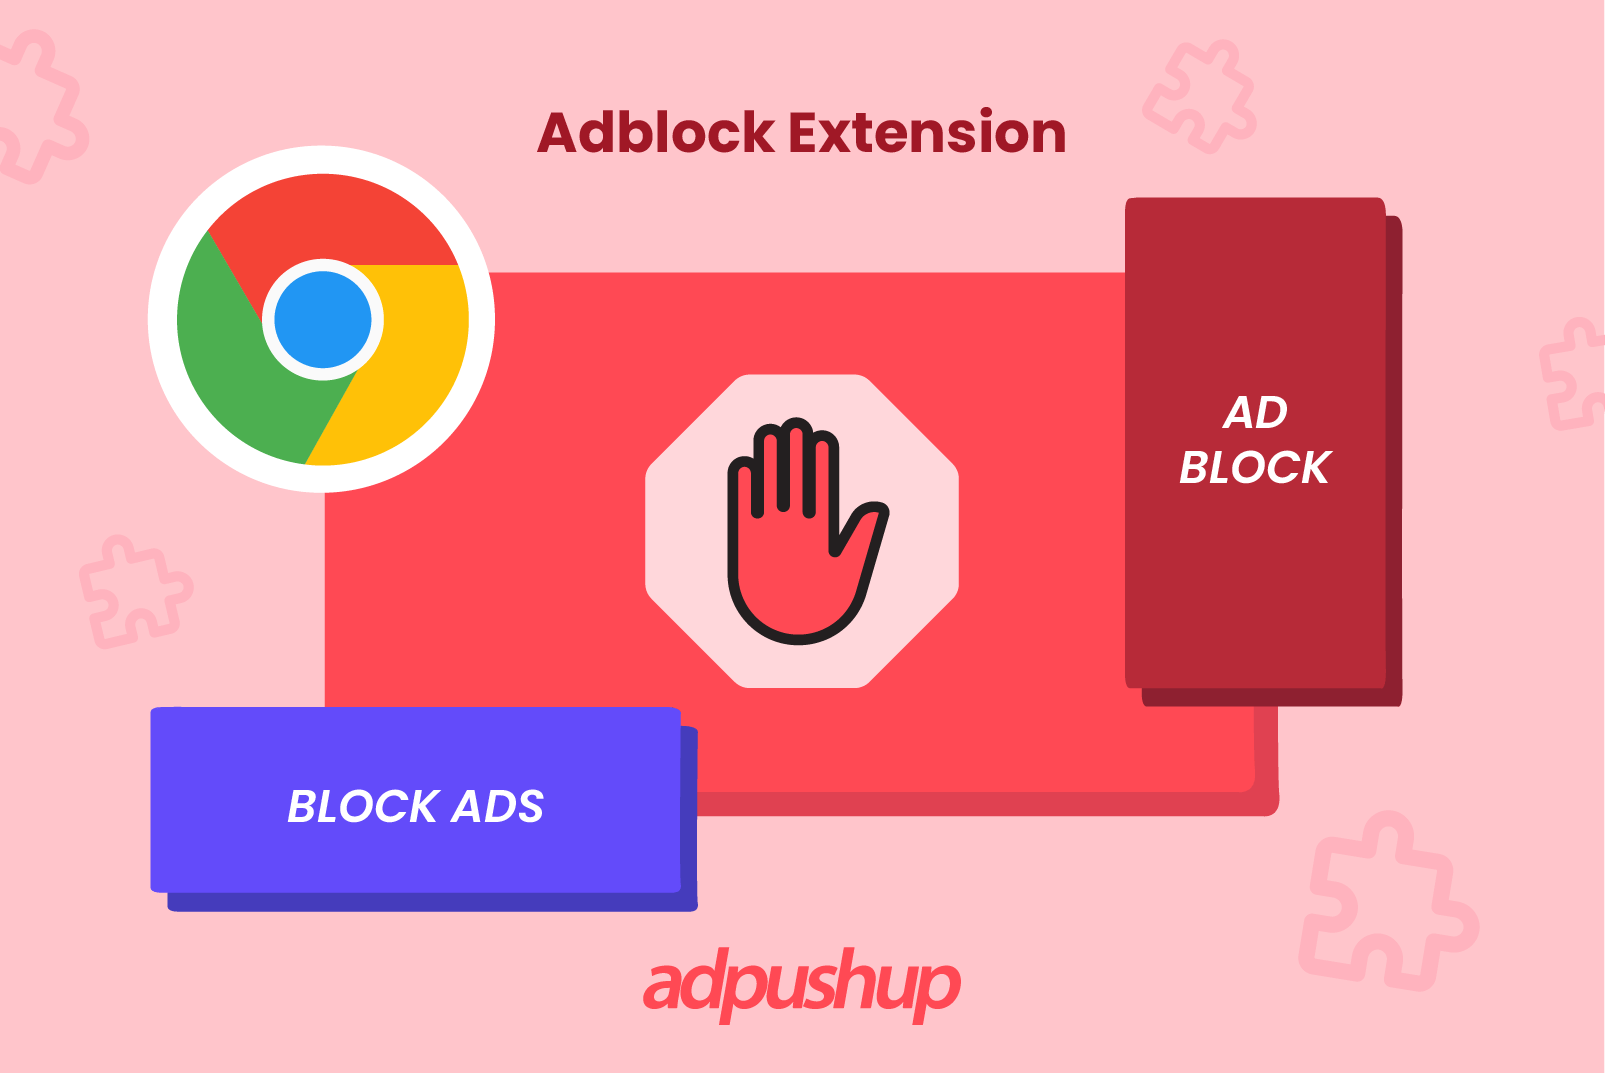 Firefox and Chrome are squaring off over ad-blocker extensions